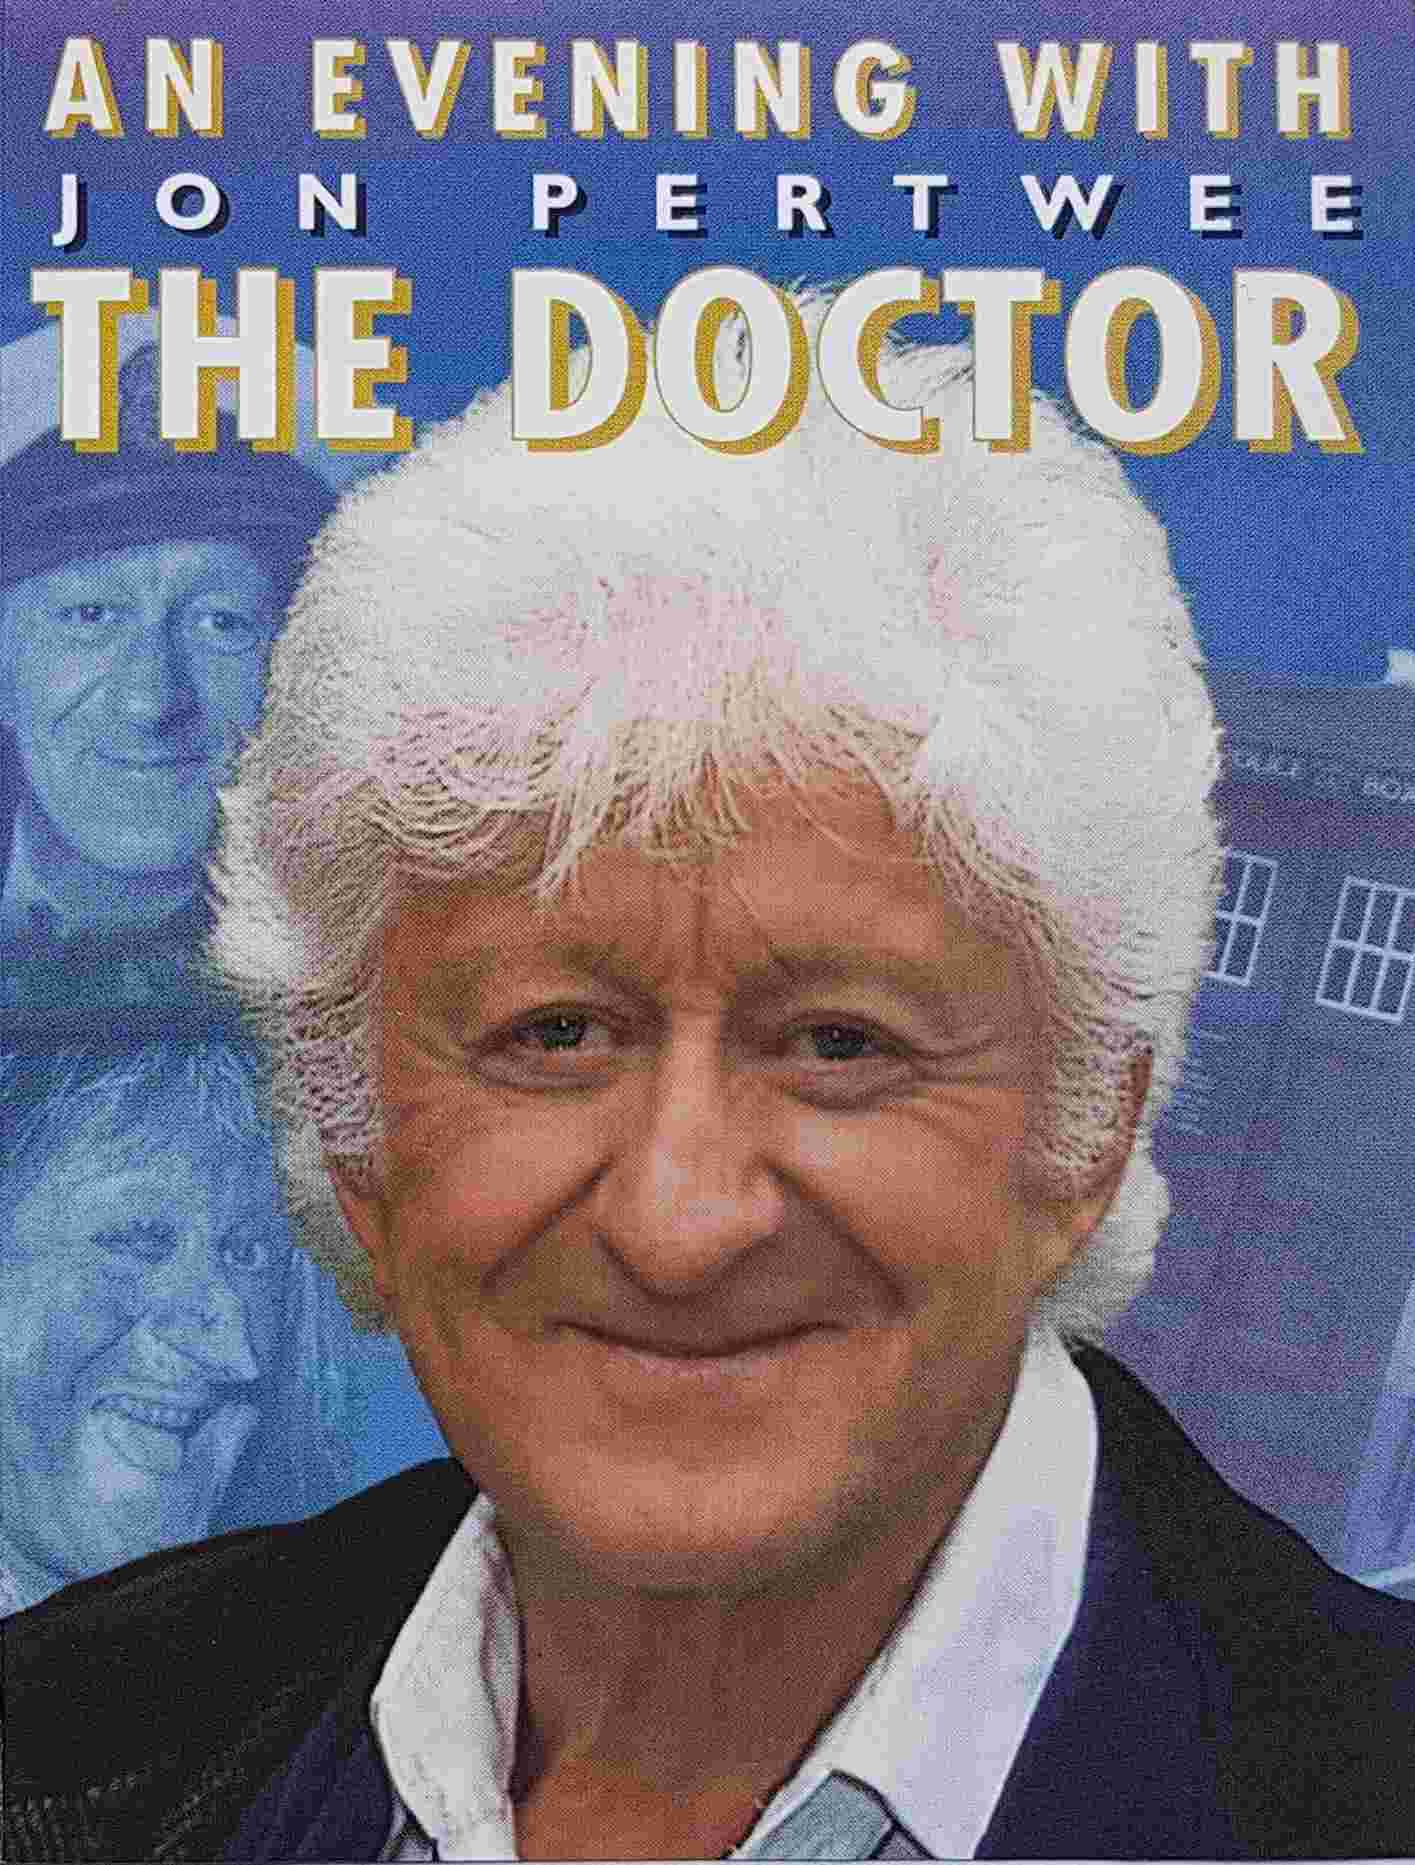 Picture of An evening with the doctor, a tribute to Jon Pertwee by artist Unknown from the BBC cassettes - Records and Tapes library